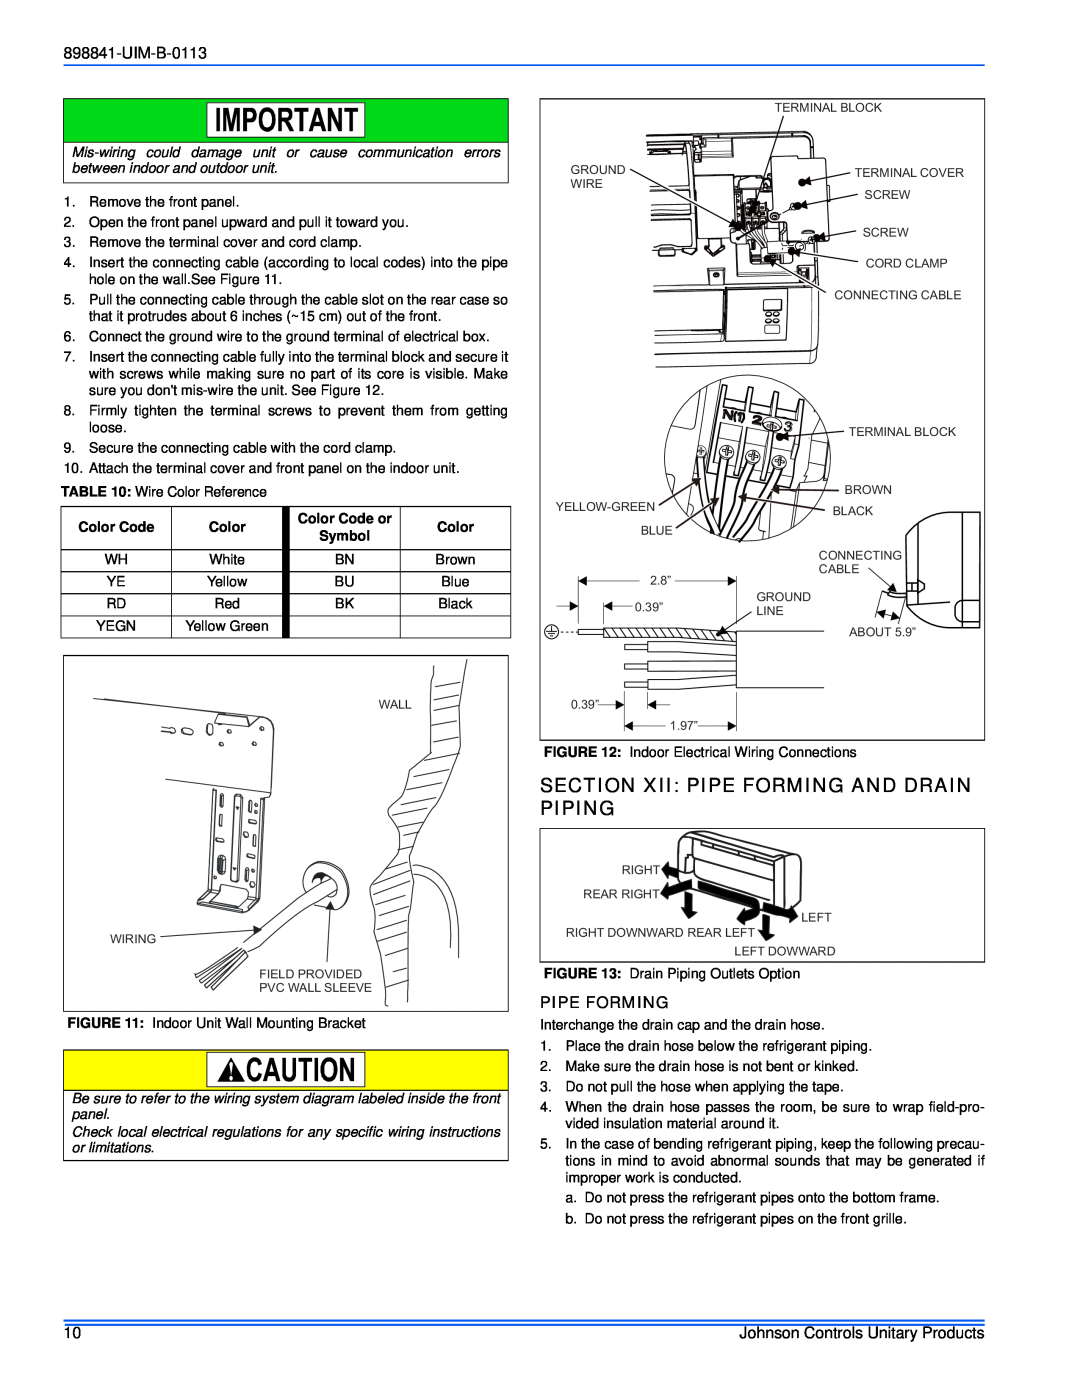 Johnson Controls 22 SEER installation manual Section Xii Pipe Forming And Drain Piping, UIM-B-0113 